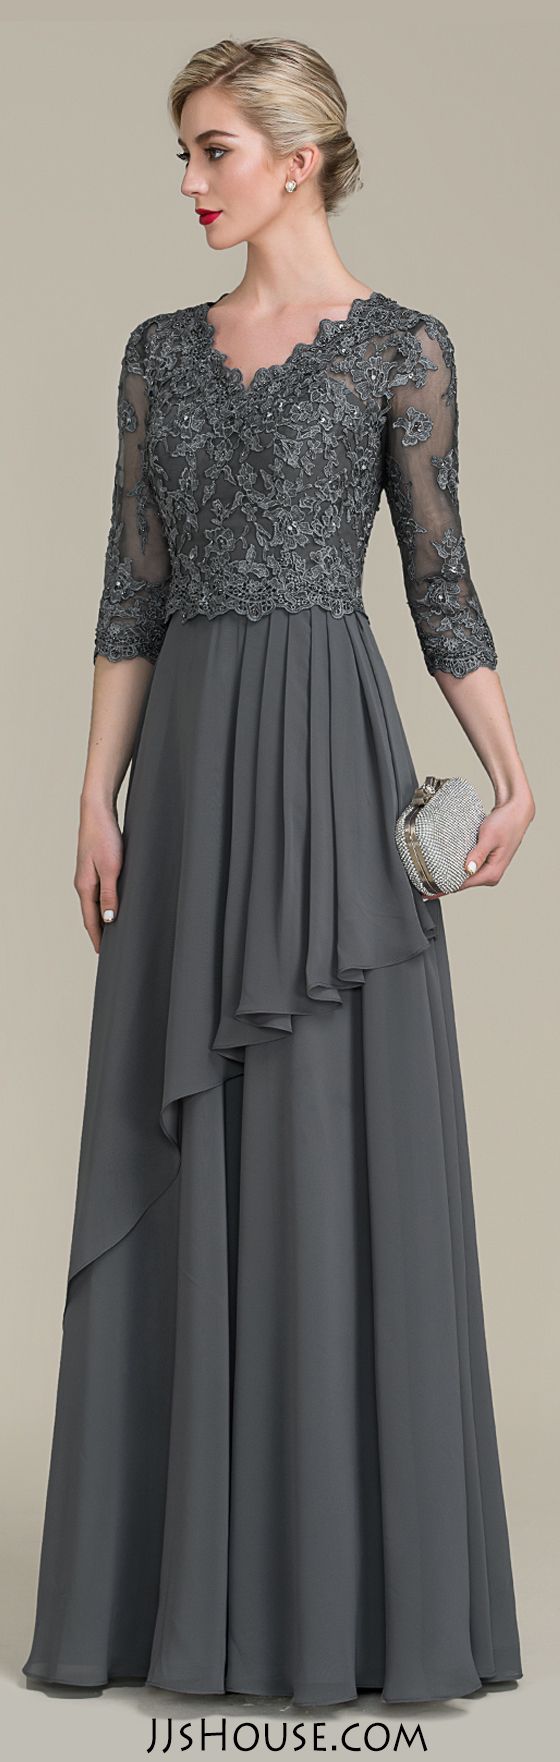 A-Line V-neck Floor-Length Chiffon Lace Mother of the Bride Dress